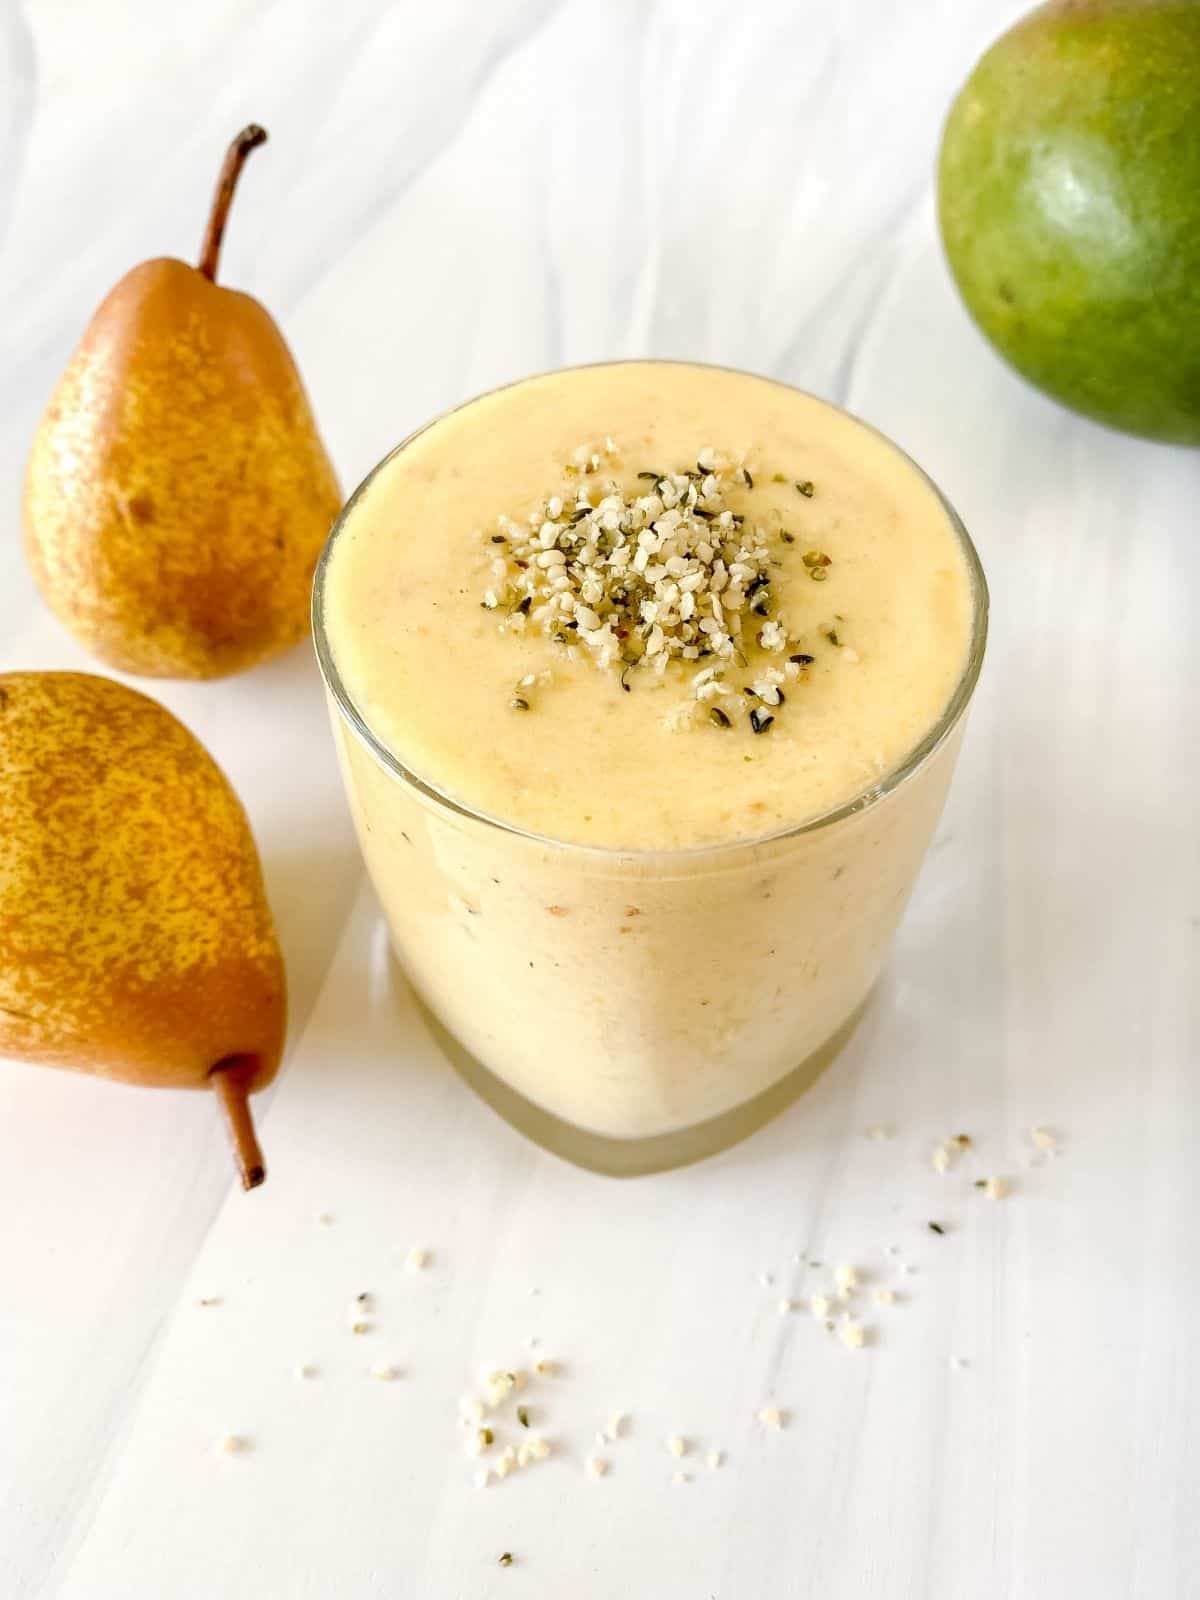 mango pear smoothie in a glass with hemp seed on top next to pears and a mango.